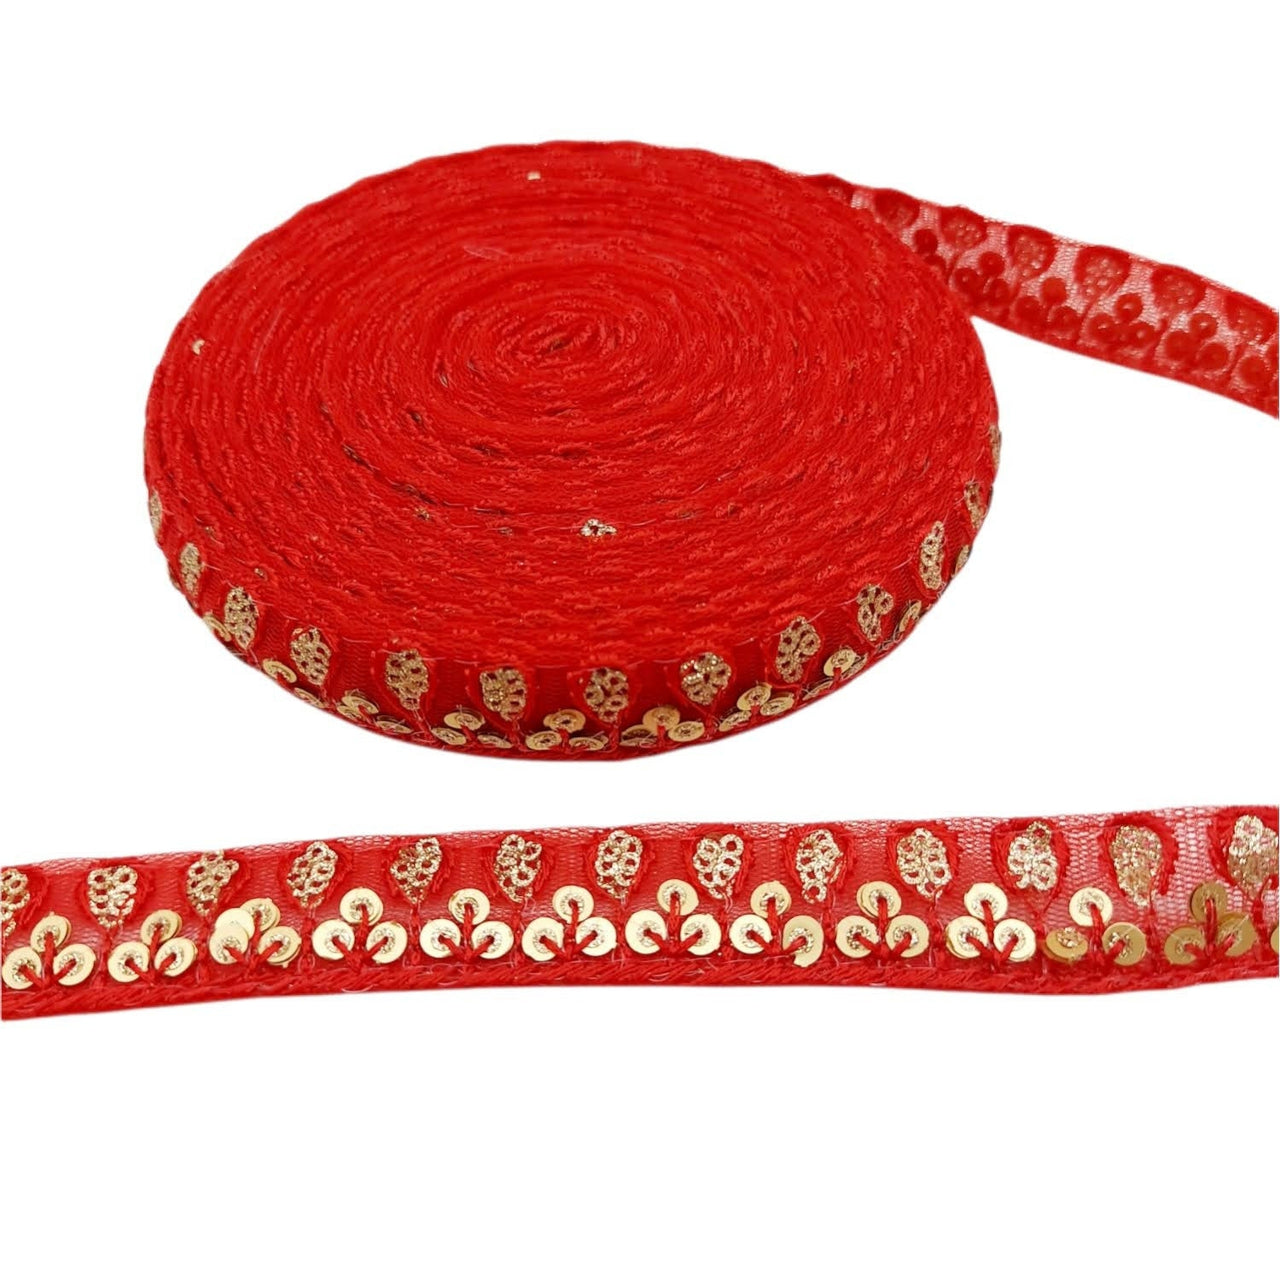 Net Embroidered Lace Trim Sequins Trim 3 Yards Decorative Sari Border Costume Ribbon Crafting Sewing Tape